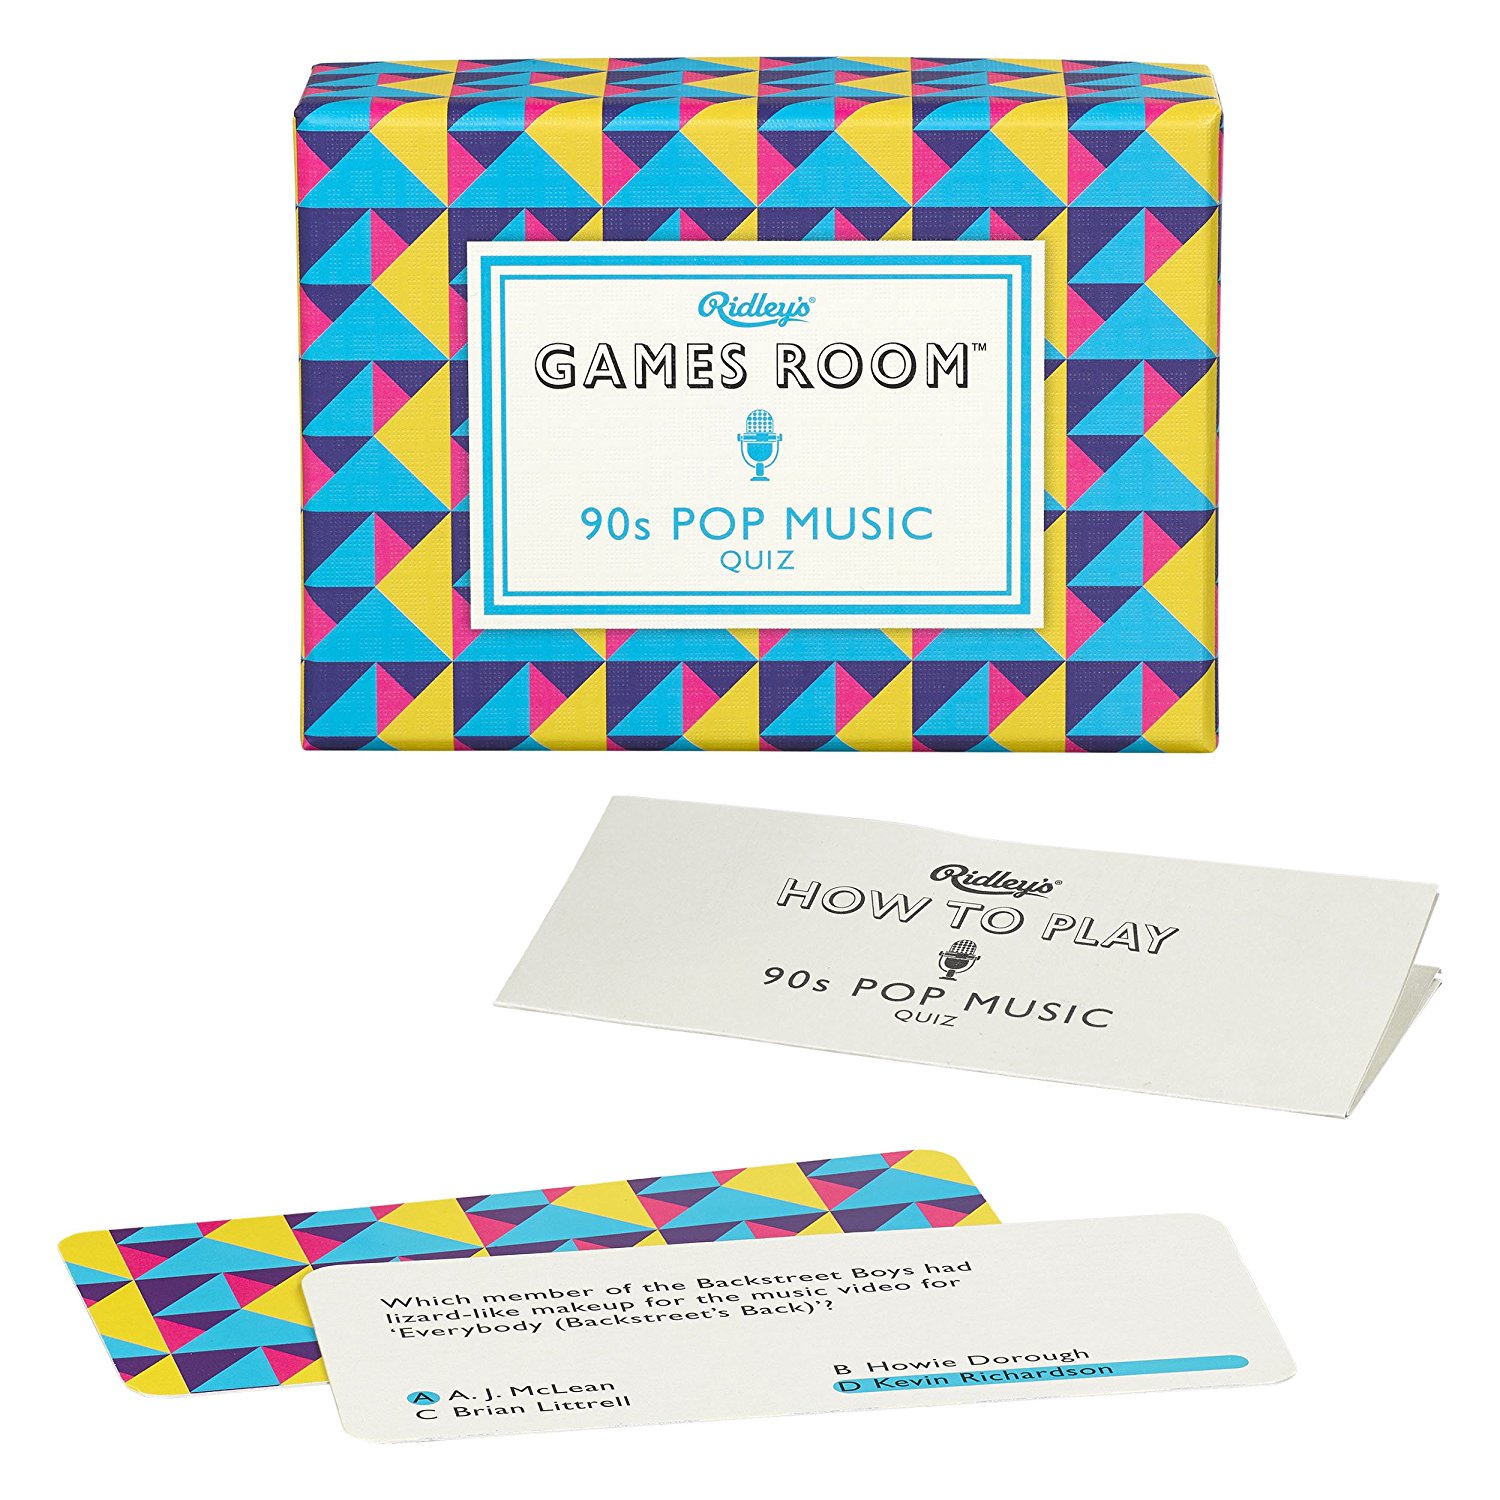 Games Room 90's Pop Music Quiz Trivia Game | Ridley's